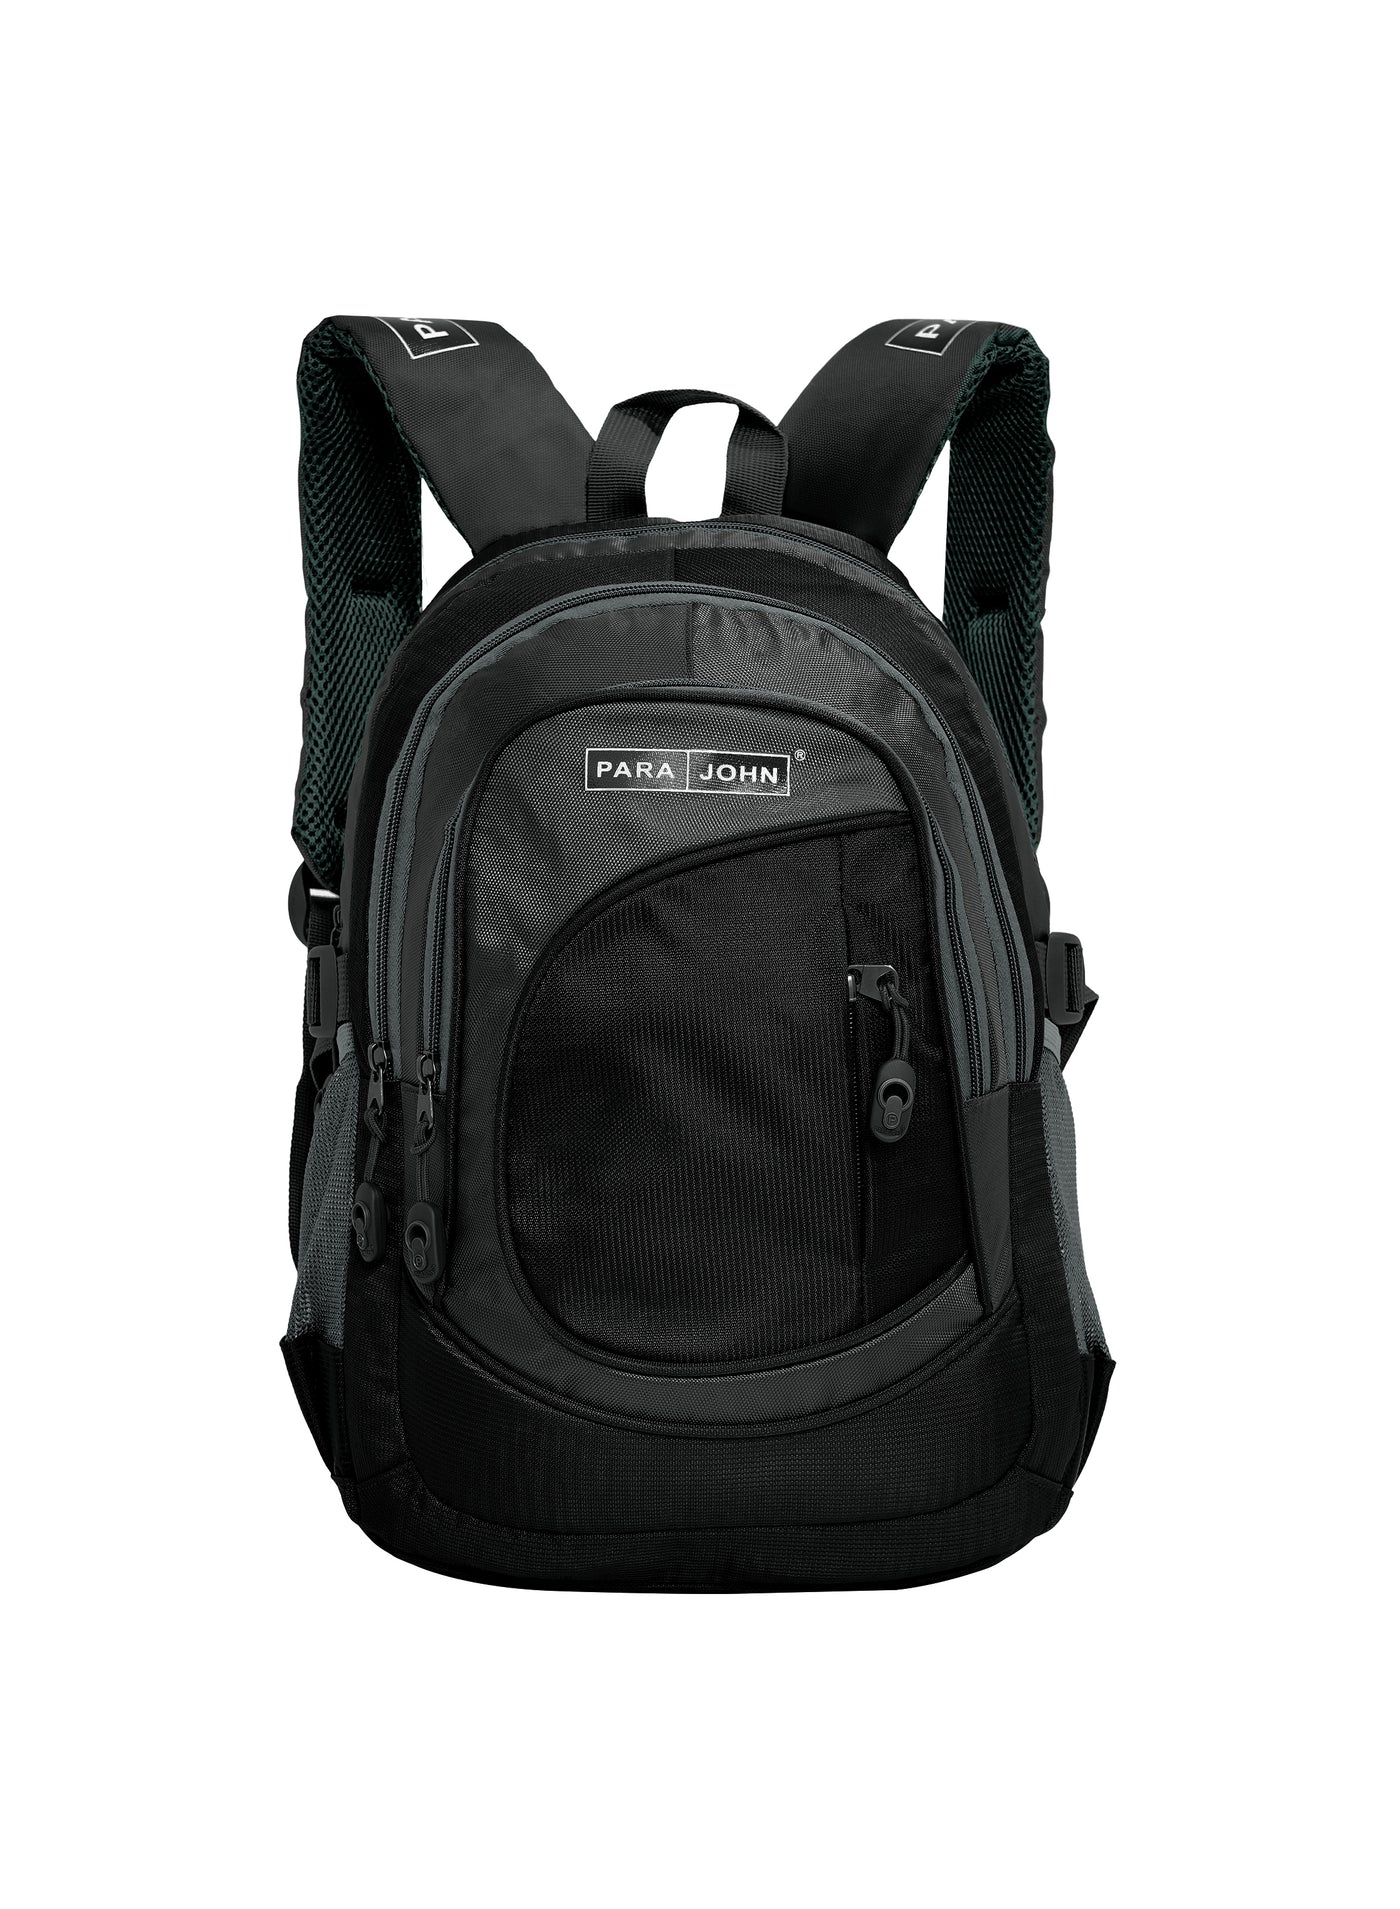 Classic Students School Backpack Black 16 Inch